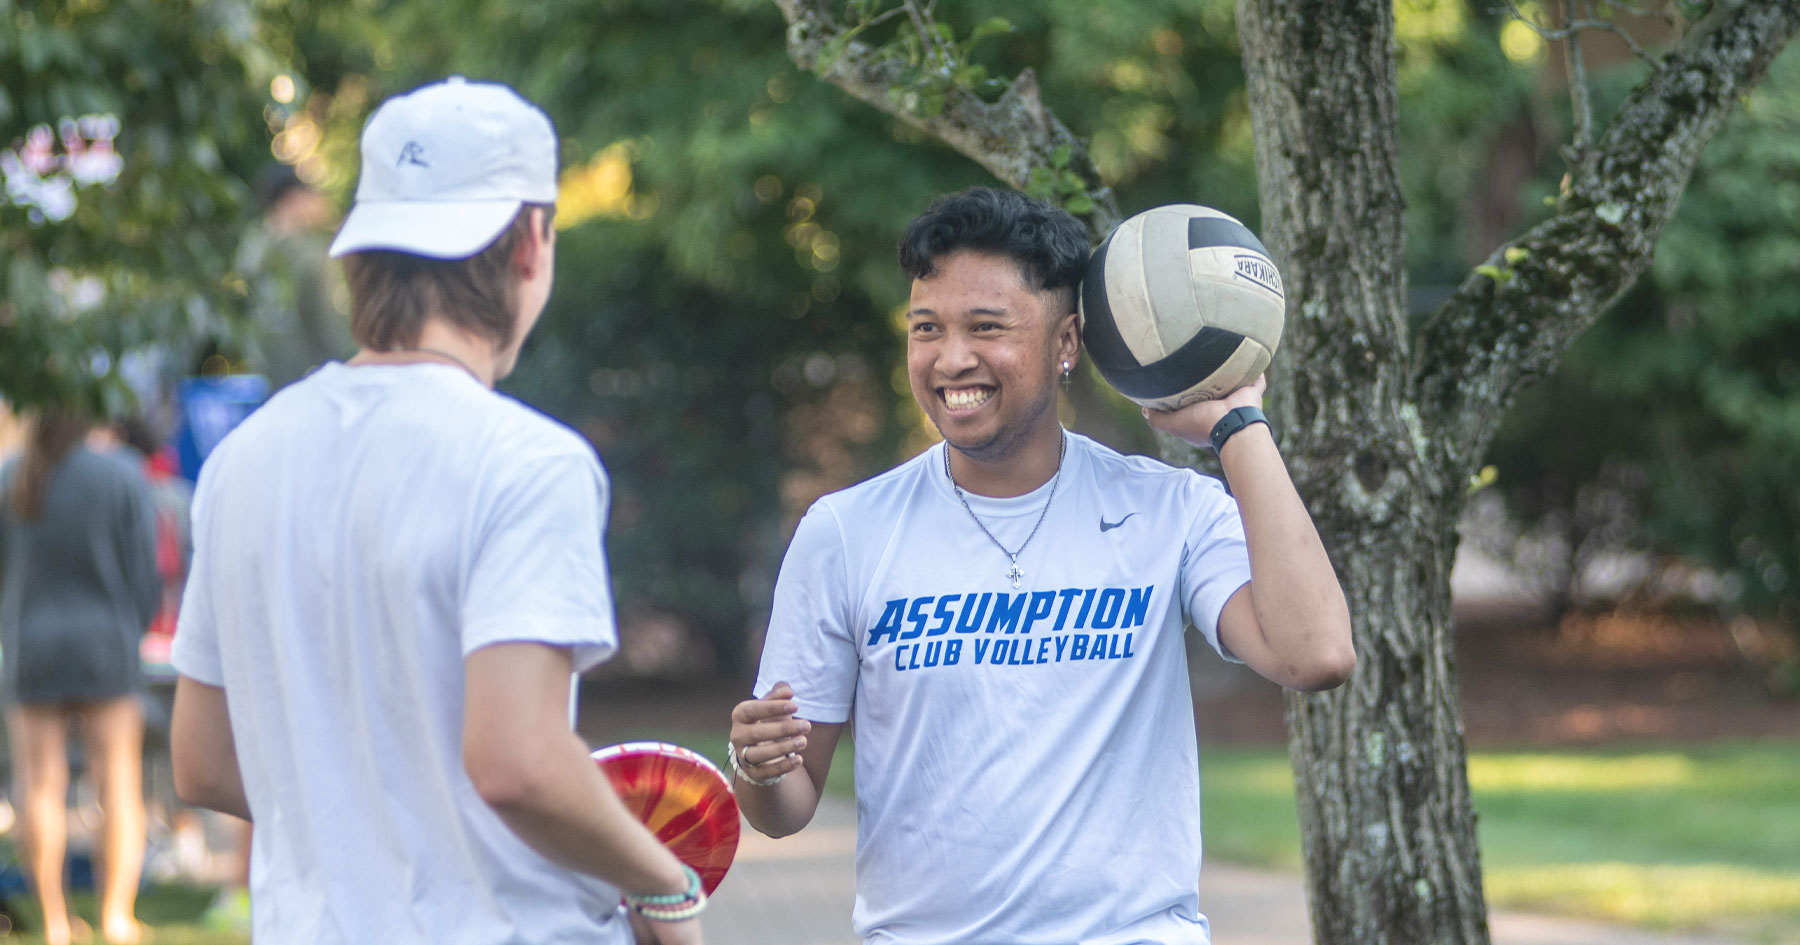 Assumption student holding a volleyball and wearing a shirt that reads 